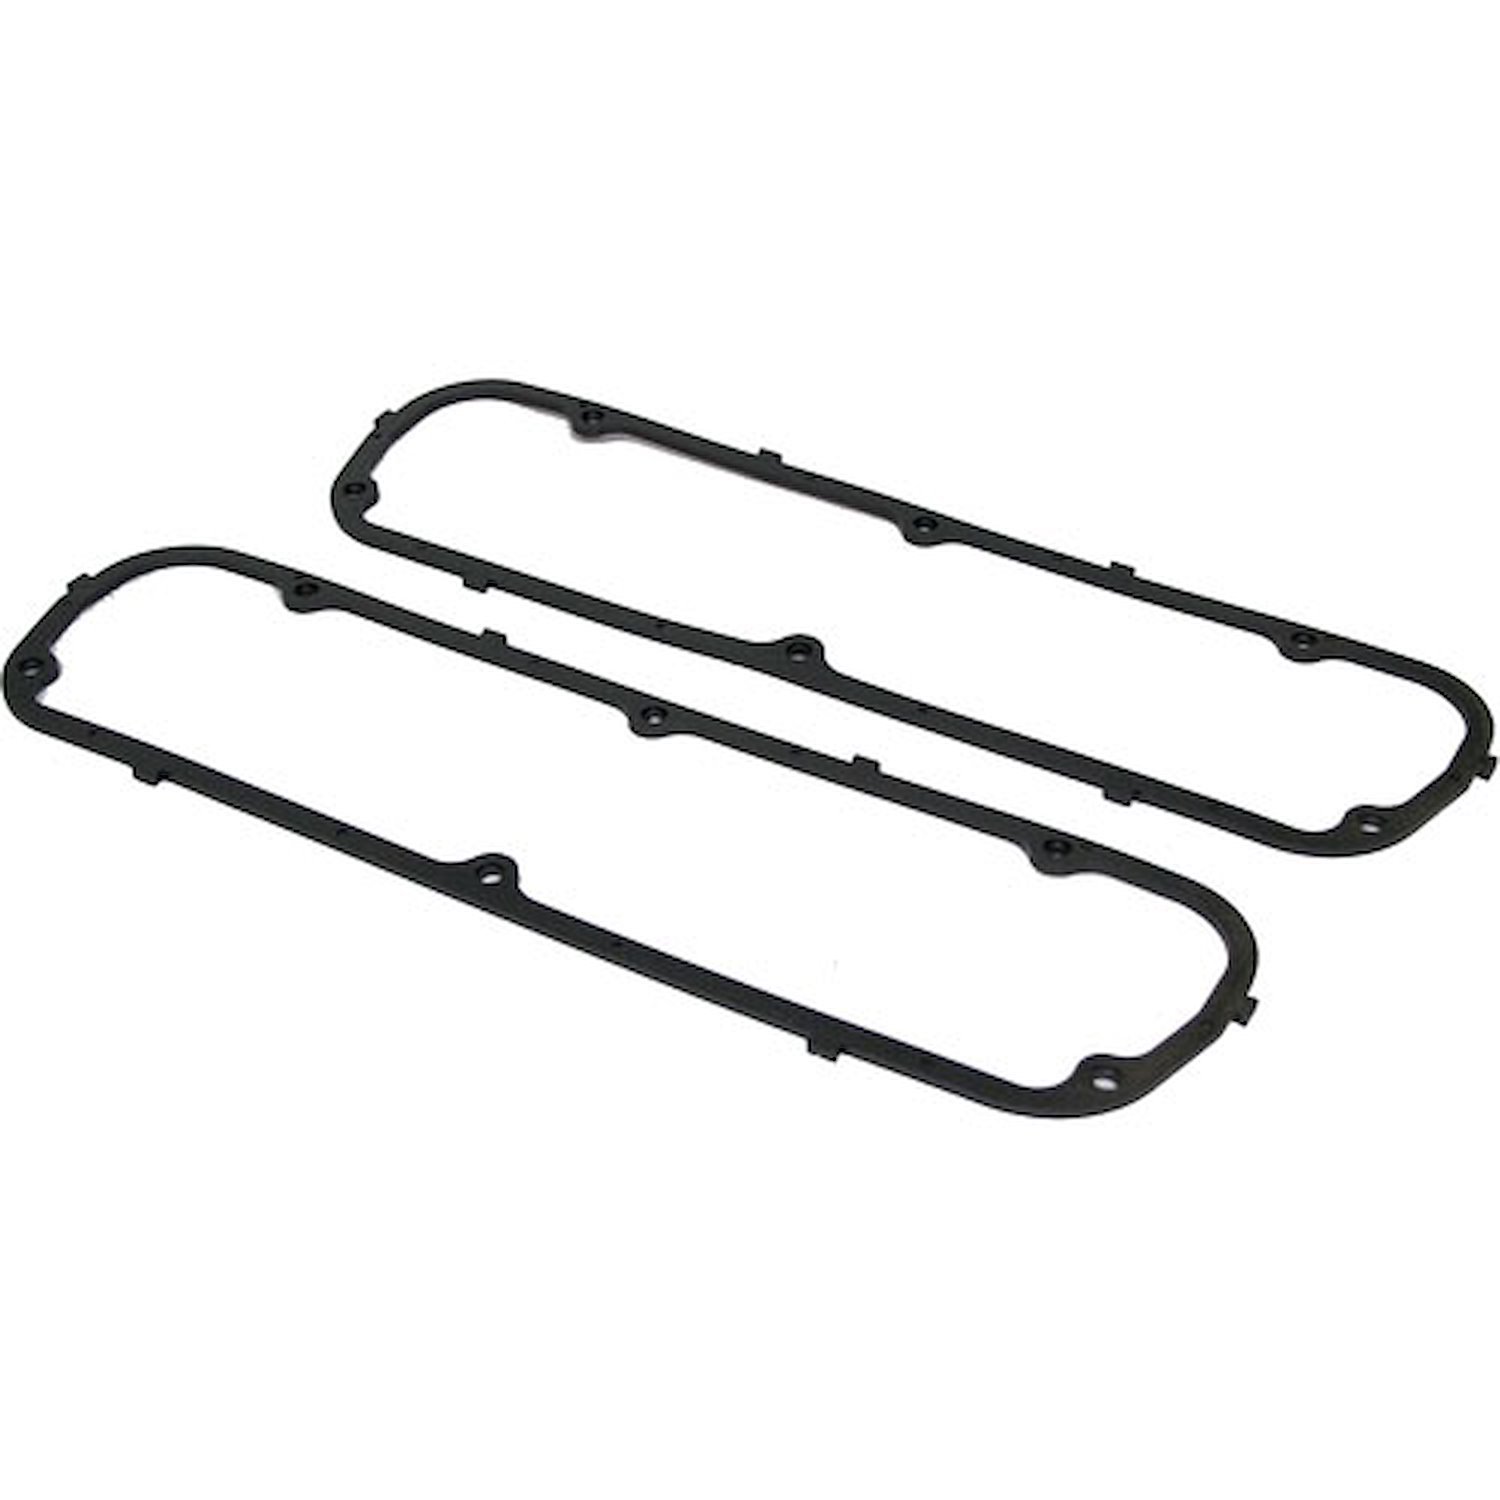 Valve Cover Gasket Set Small Block Ford